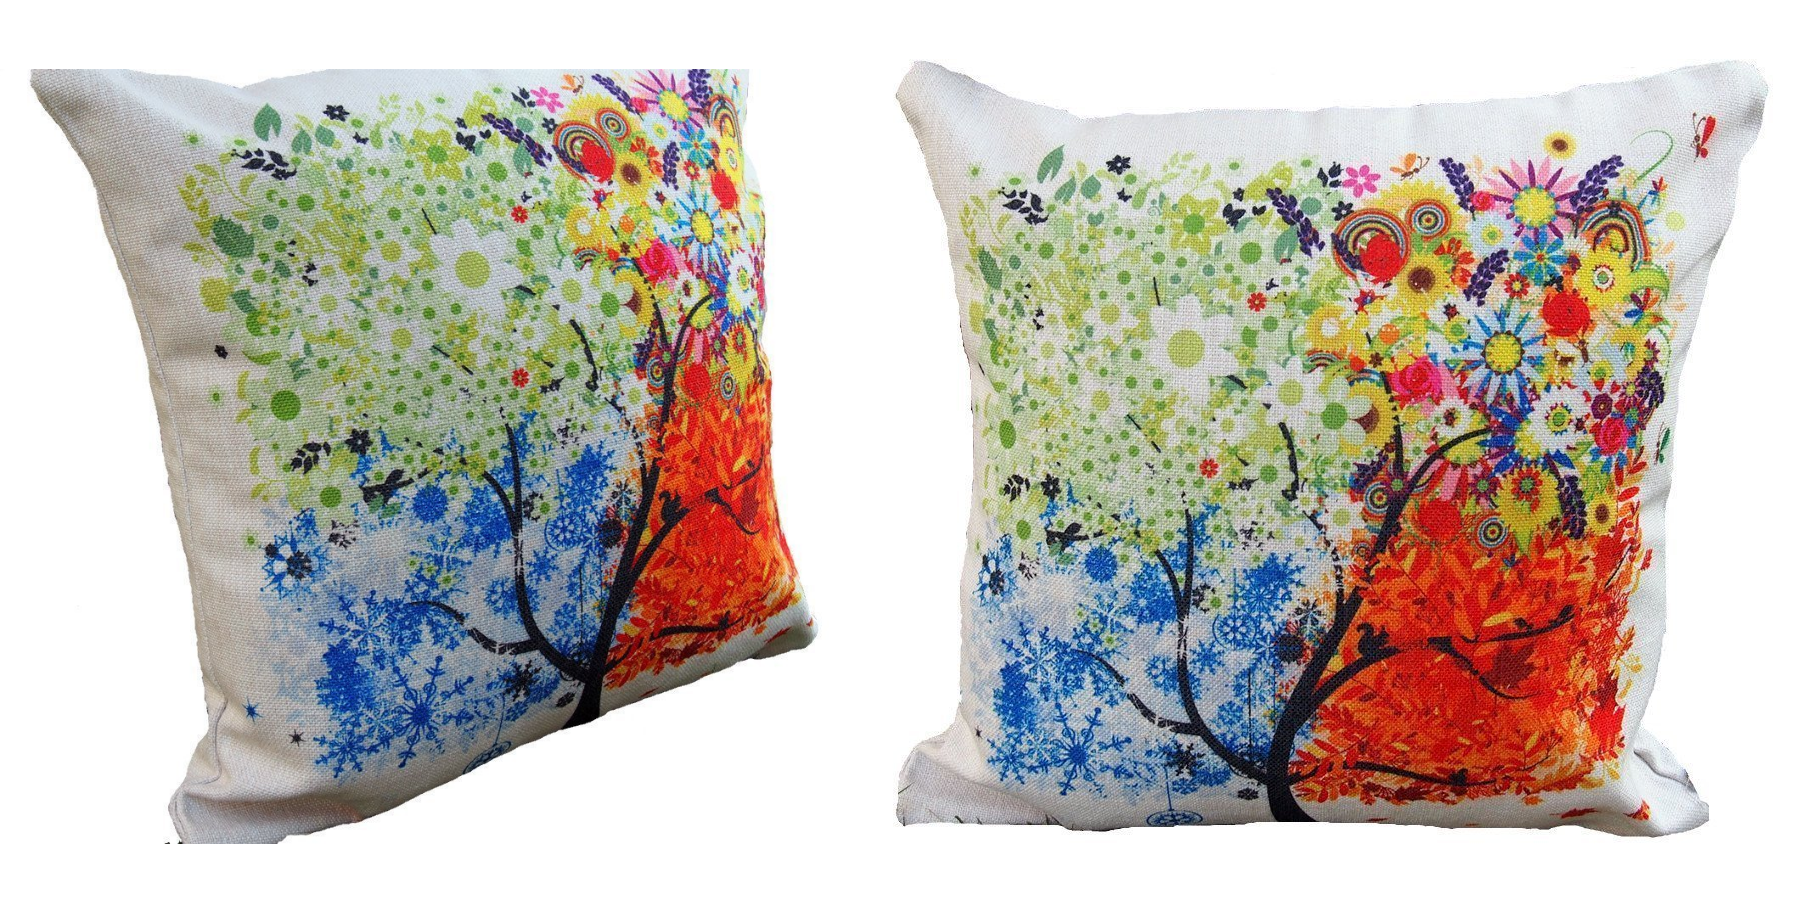 Colorful Tree Throw Pillow Cover Just $1.19 SHIPPED!